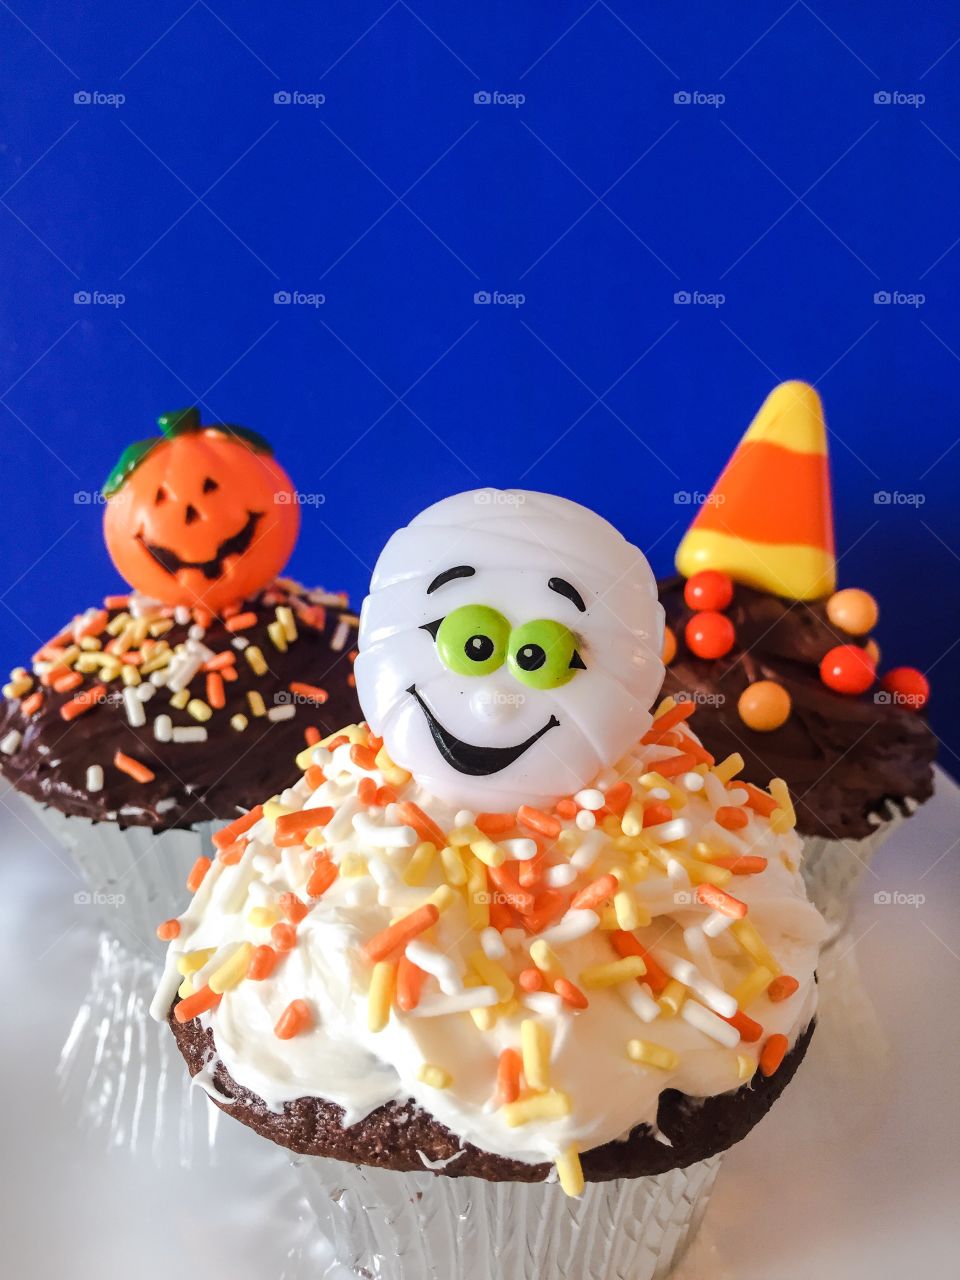 A collection of Halloween themed cupcakes.